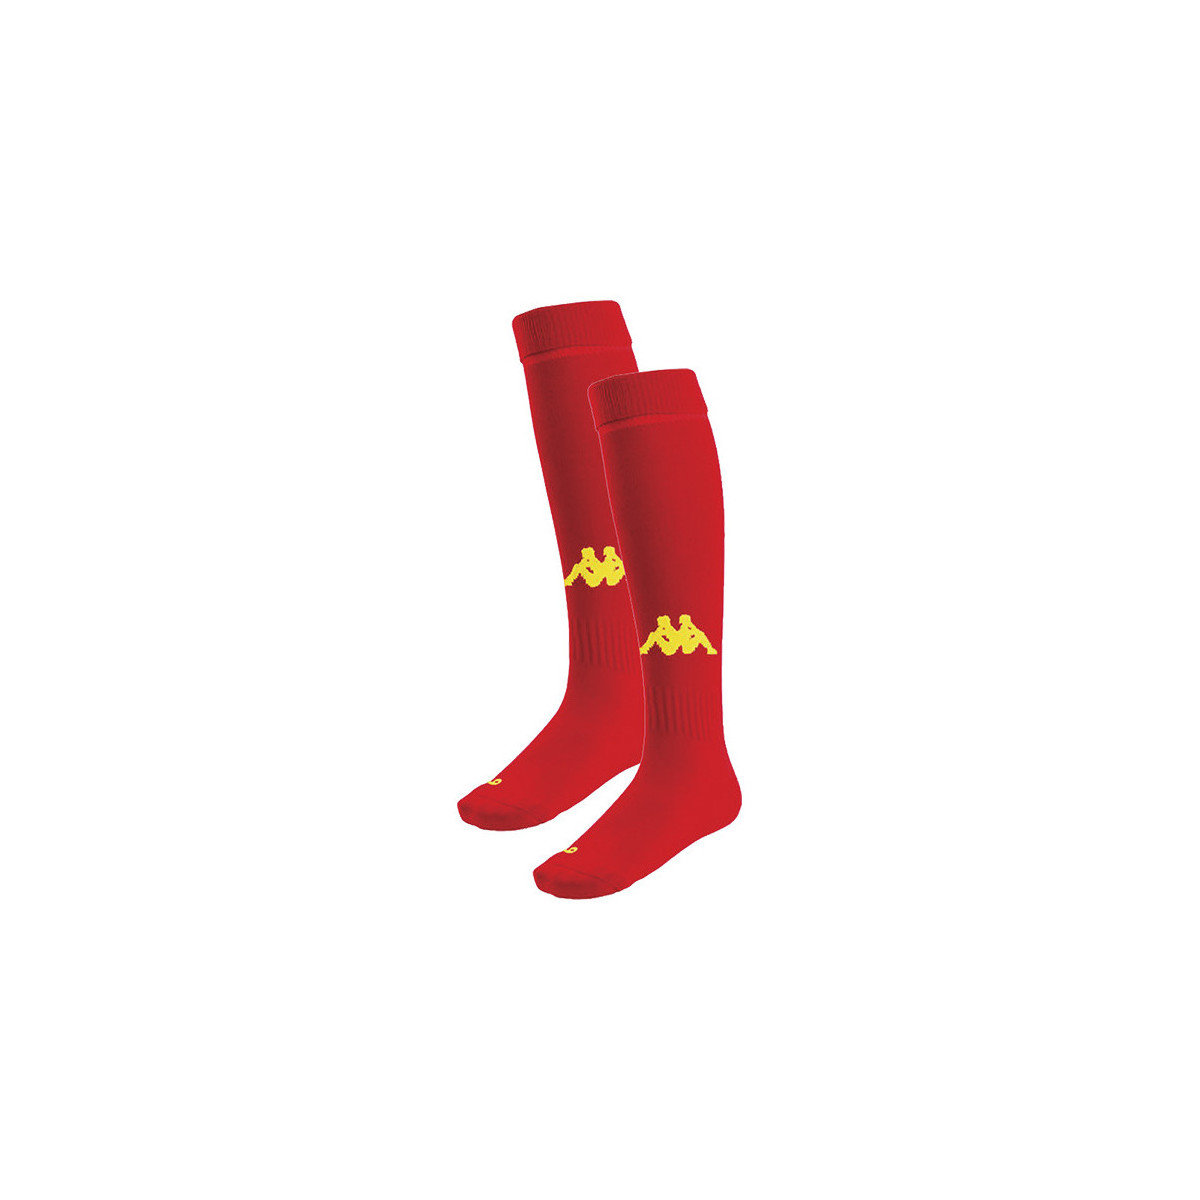 Kappa Rouge Chaussettes Penao (3 paires) tnnhbfVT